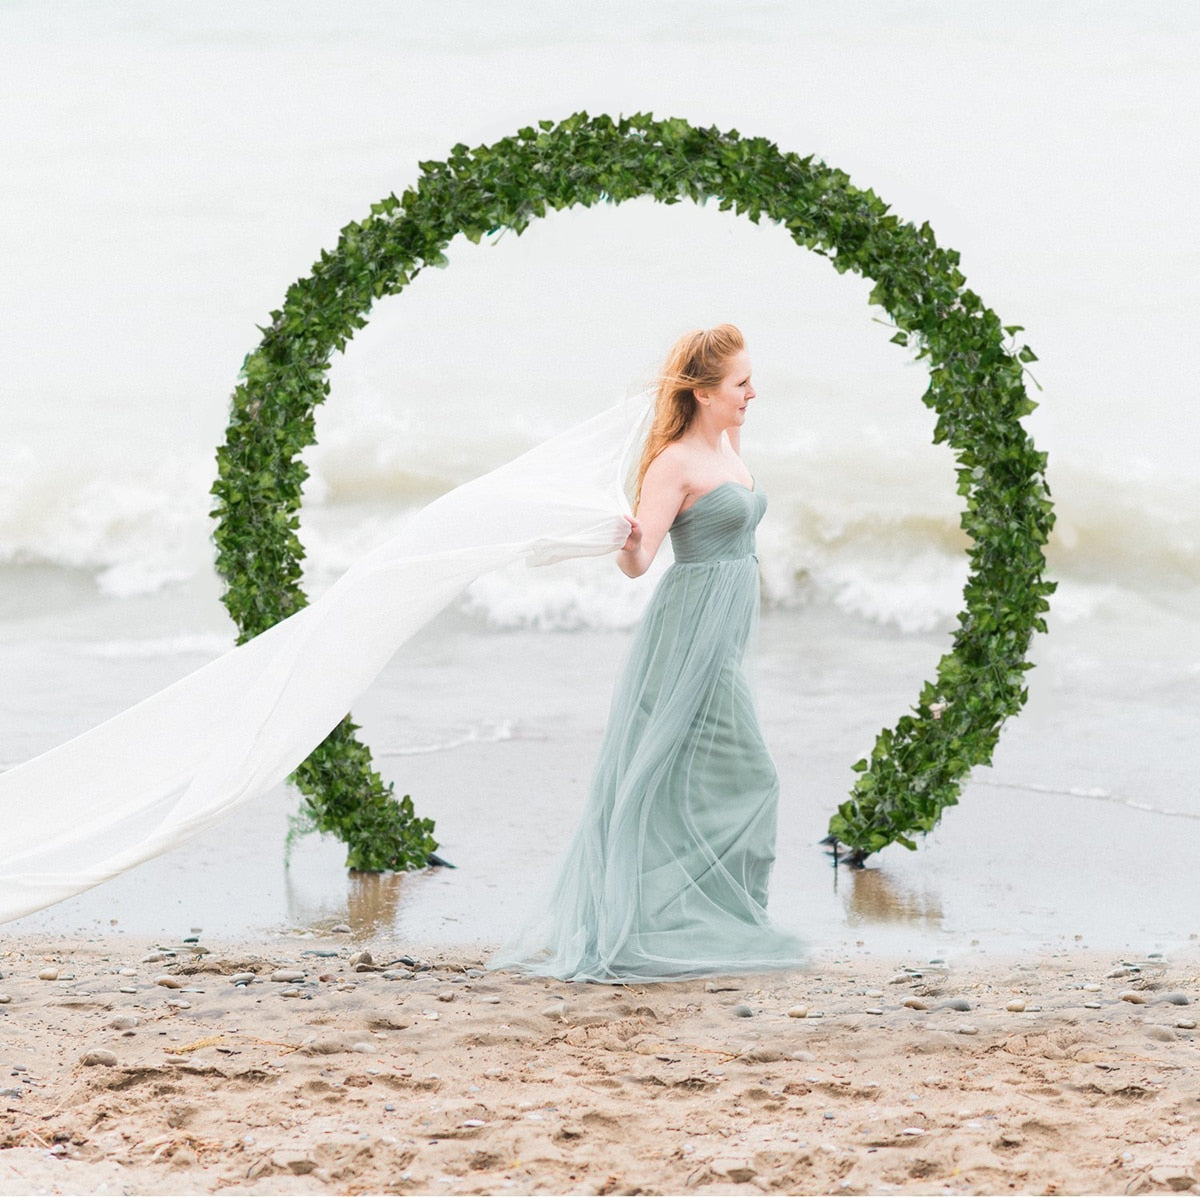 A bride on a beach with a large circular green ivy arch, creating a romantic and nature-inspired setting, ideal for a wedding or a cottagecore bedroom theme.